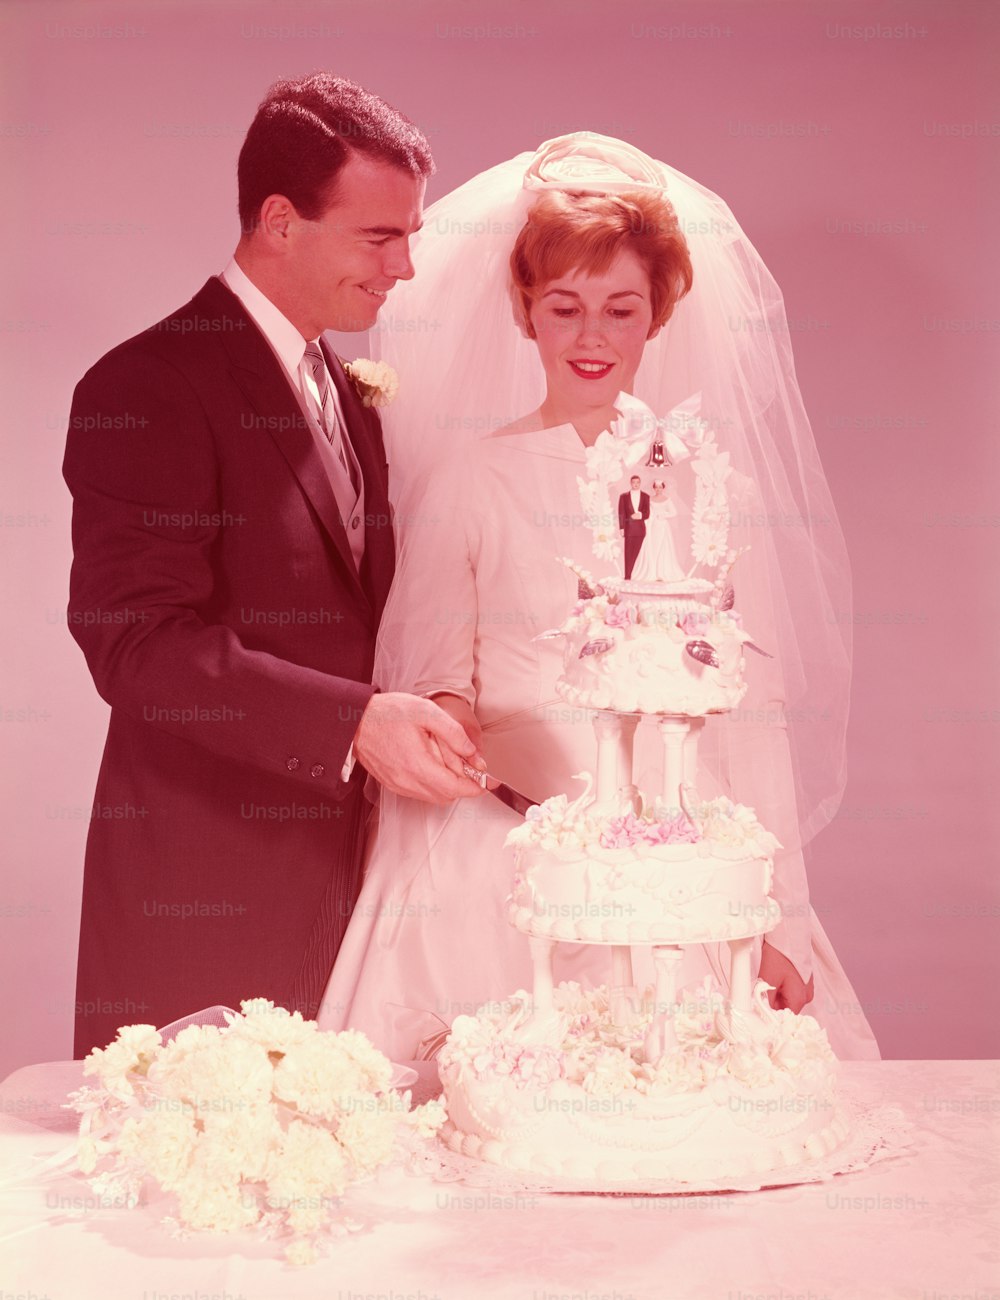 UNITED STATES - CIRCA 1950s:  Bride and groom cutting the wedding cake.